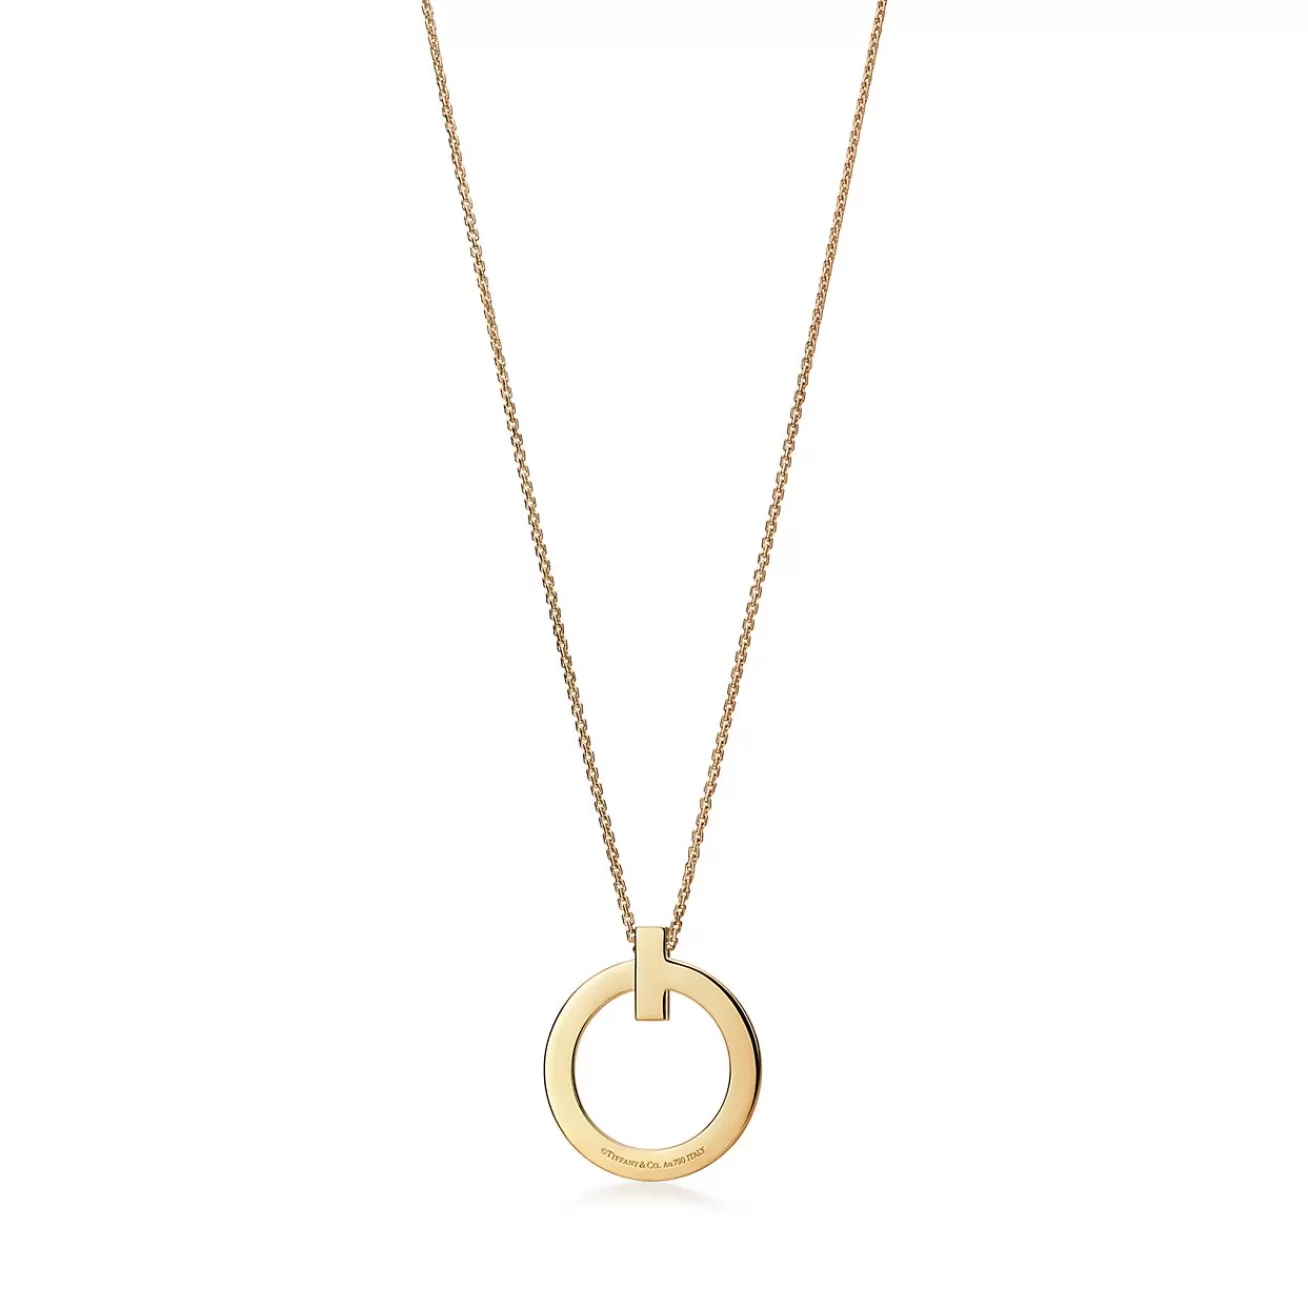 Tiffany & Co. Tiffany T T1 Circle Pendant in Yellow Gold, Large | ^ Necklaces & Pendants | Men's Jewelry